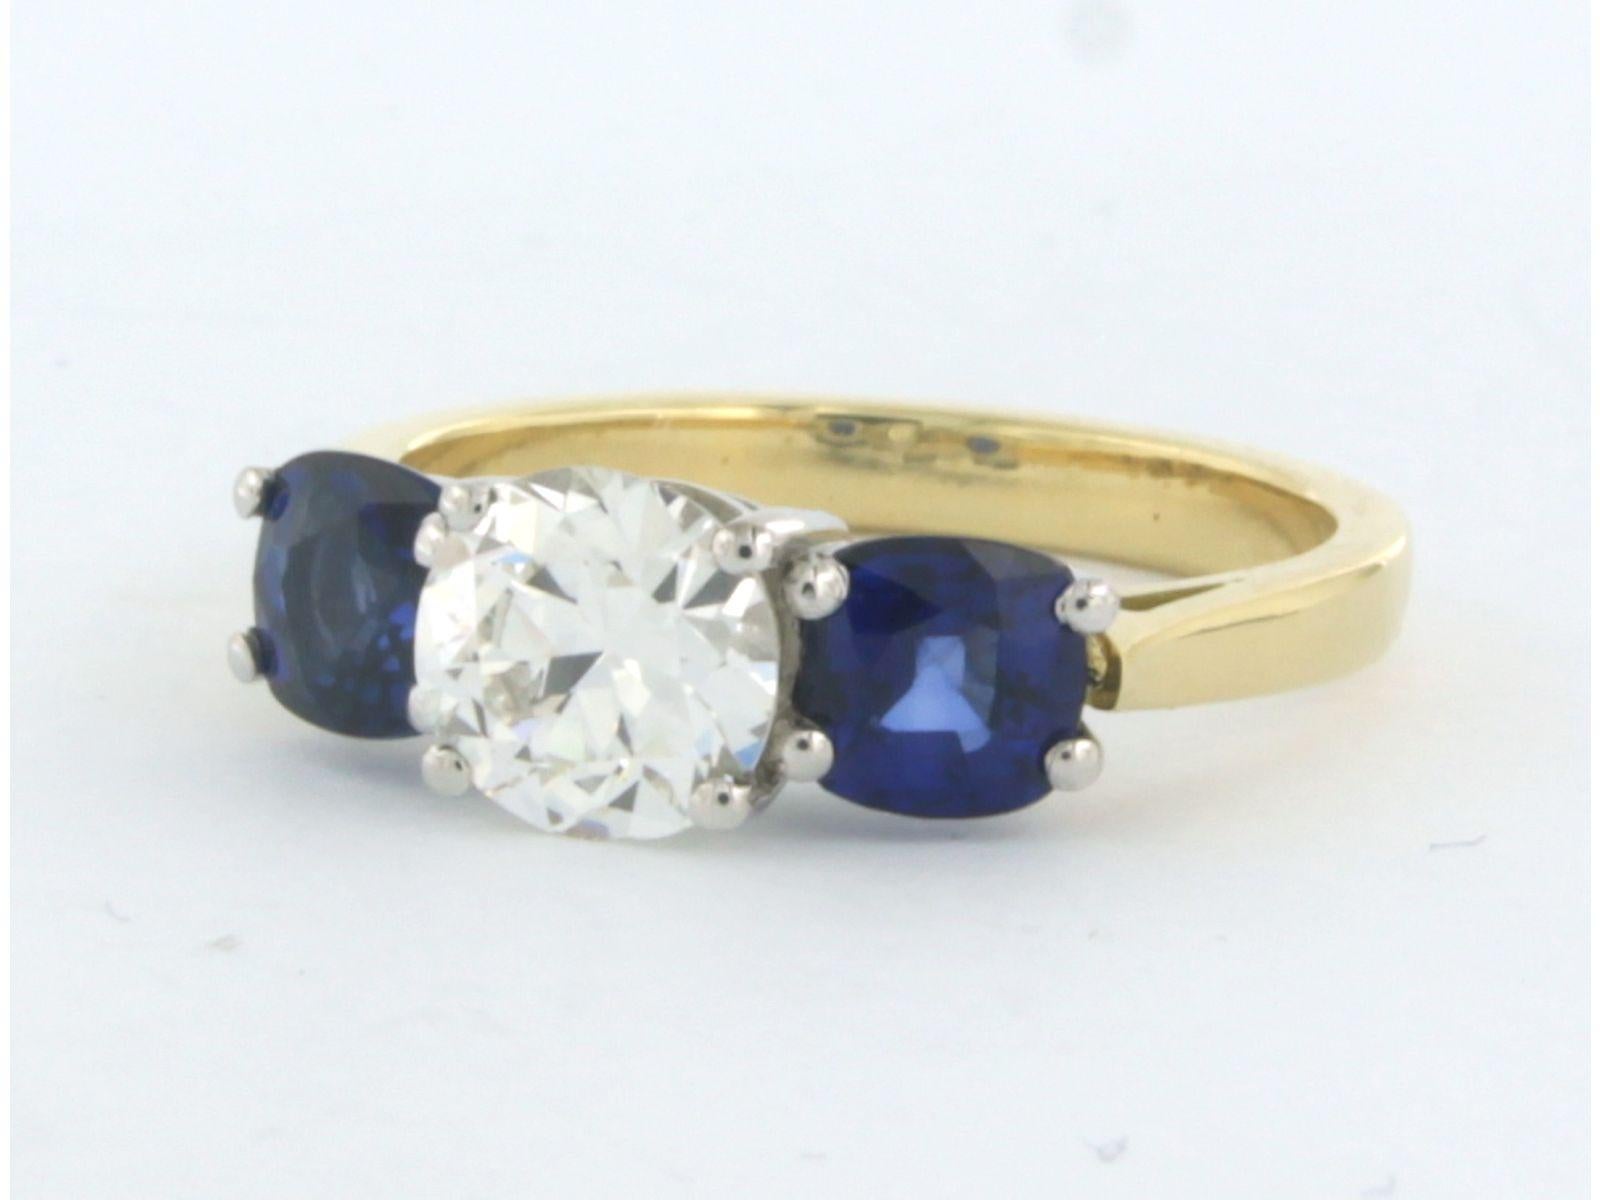 Women's or Men's Ring with sapphire and diamonds 18k bicolour gold